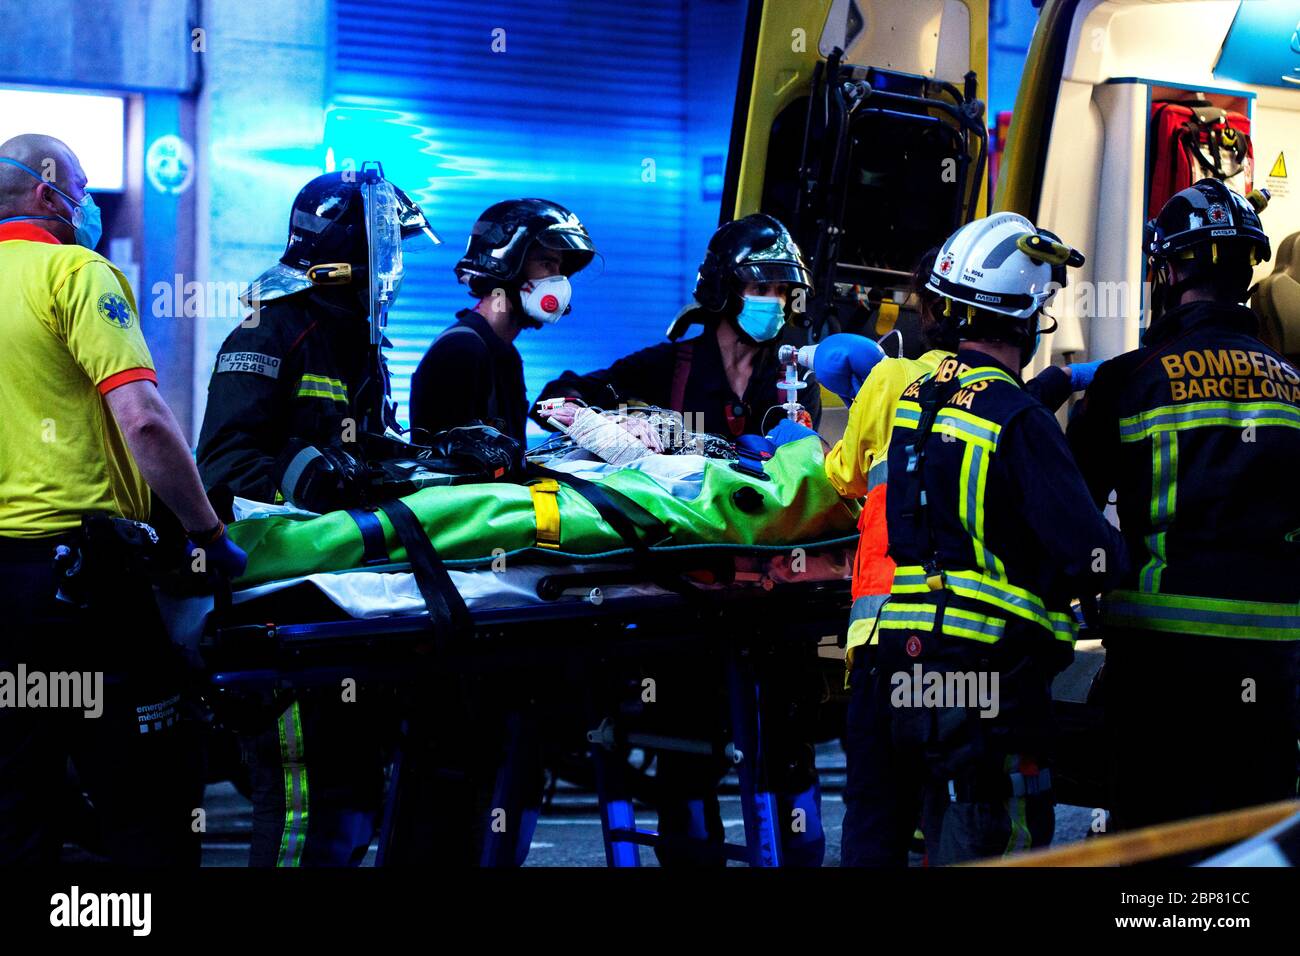 An elderly person suspected of having Corvid-19 is helped into an ambulance by firemen and healthcare workers. Stock Photo